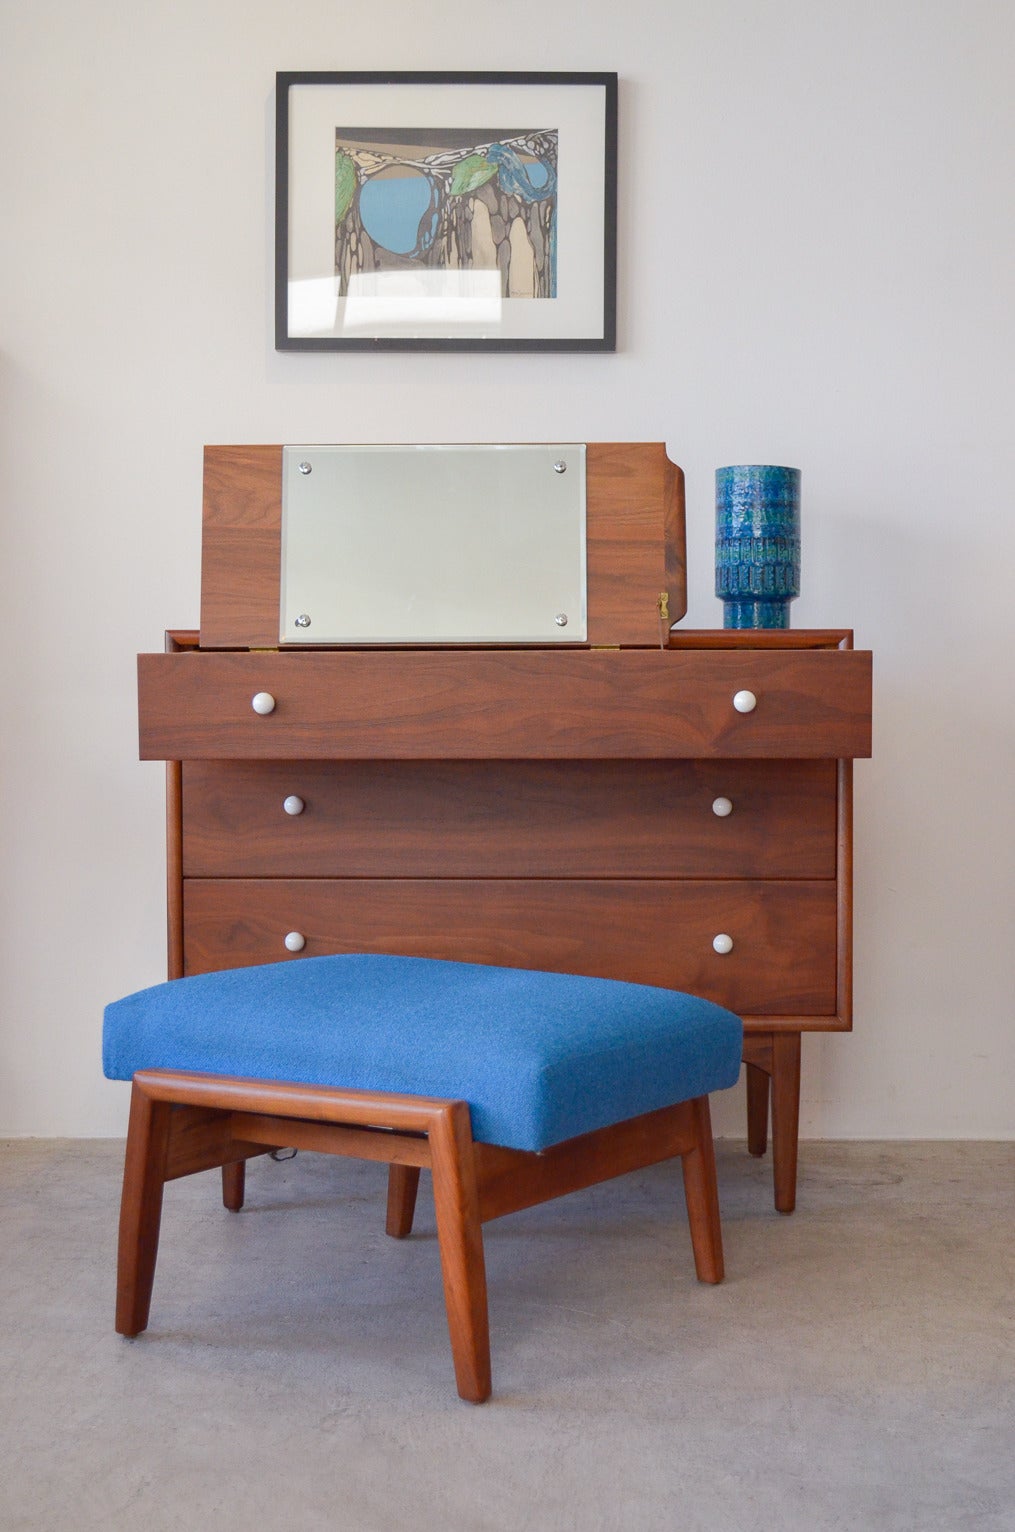 Beautiful three-drawer dresser with hidden vanity by Kipp Stewart for Drexel. Inside top drawer has the original flip-top vanity with original glass and a sliding milk glass shelf.

The entire mechanism is also removable if you don't desire the